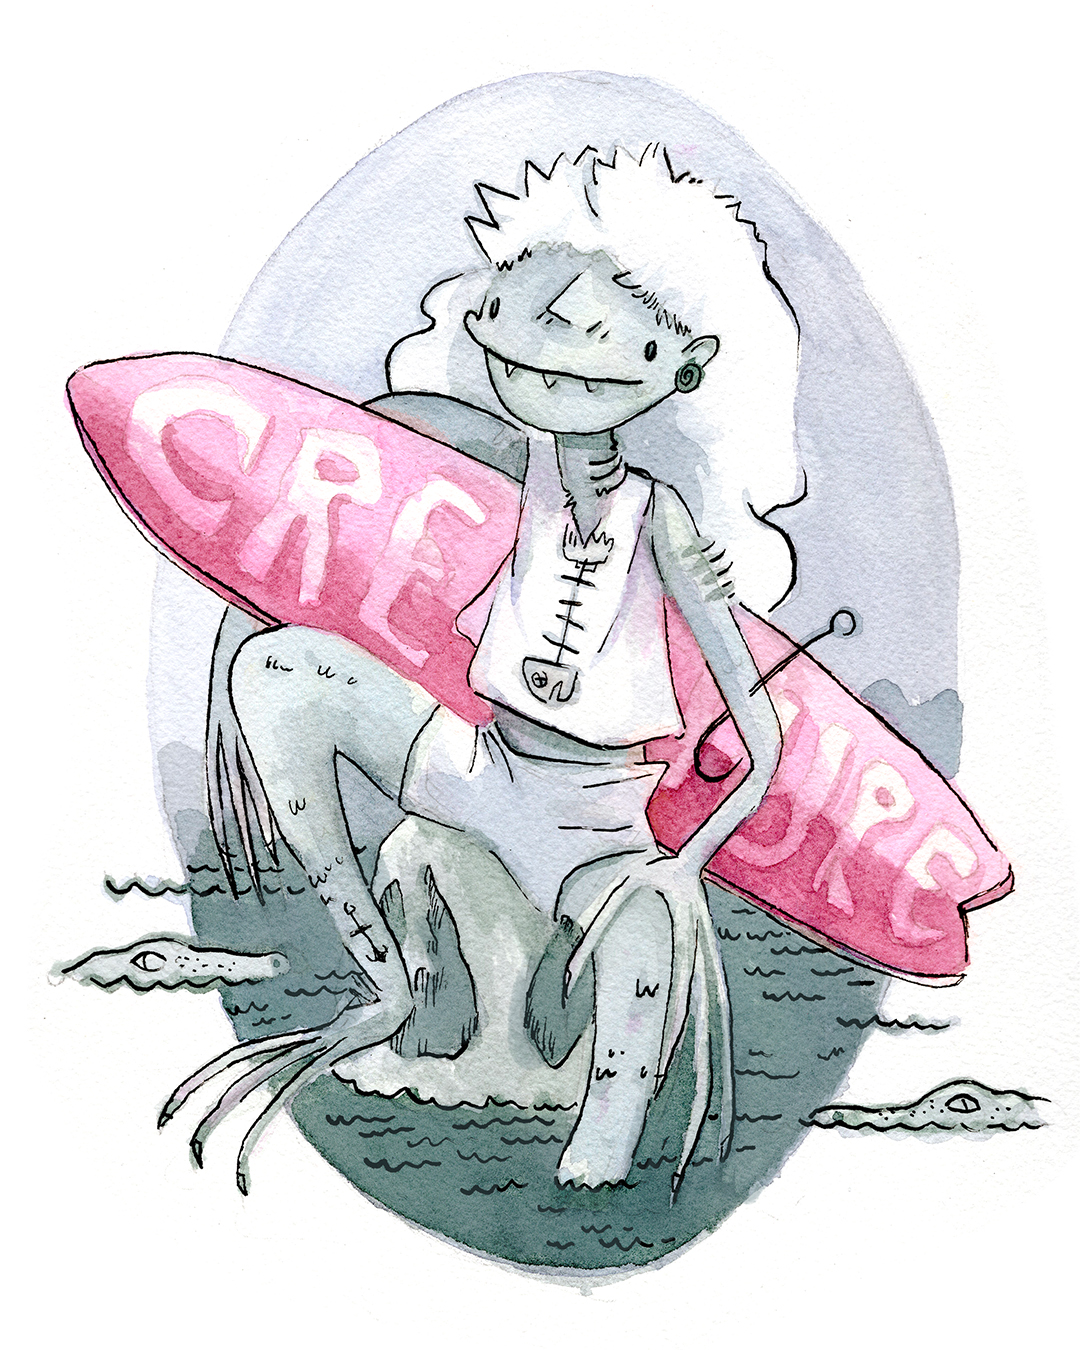 Watercolor surf swamp monster with neon pink surfboard.